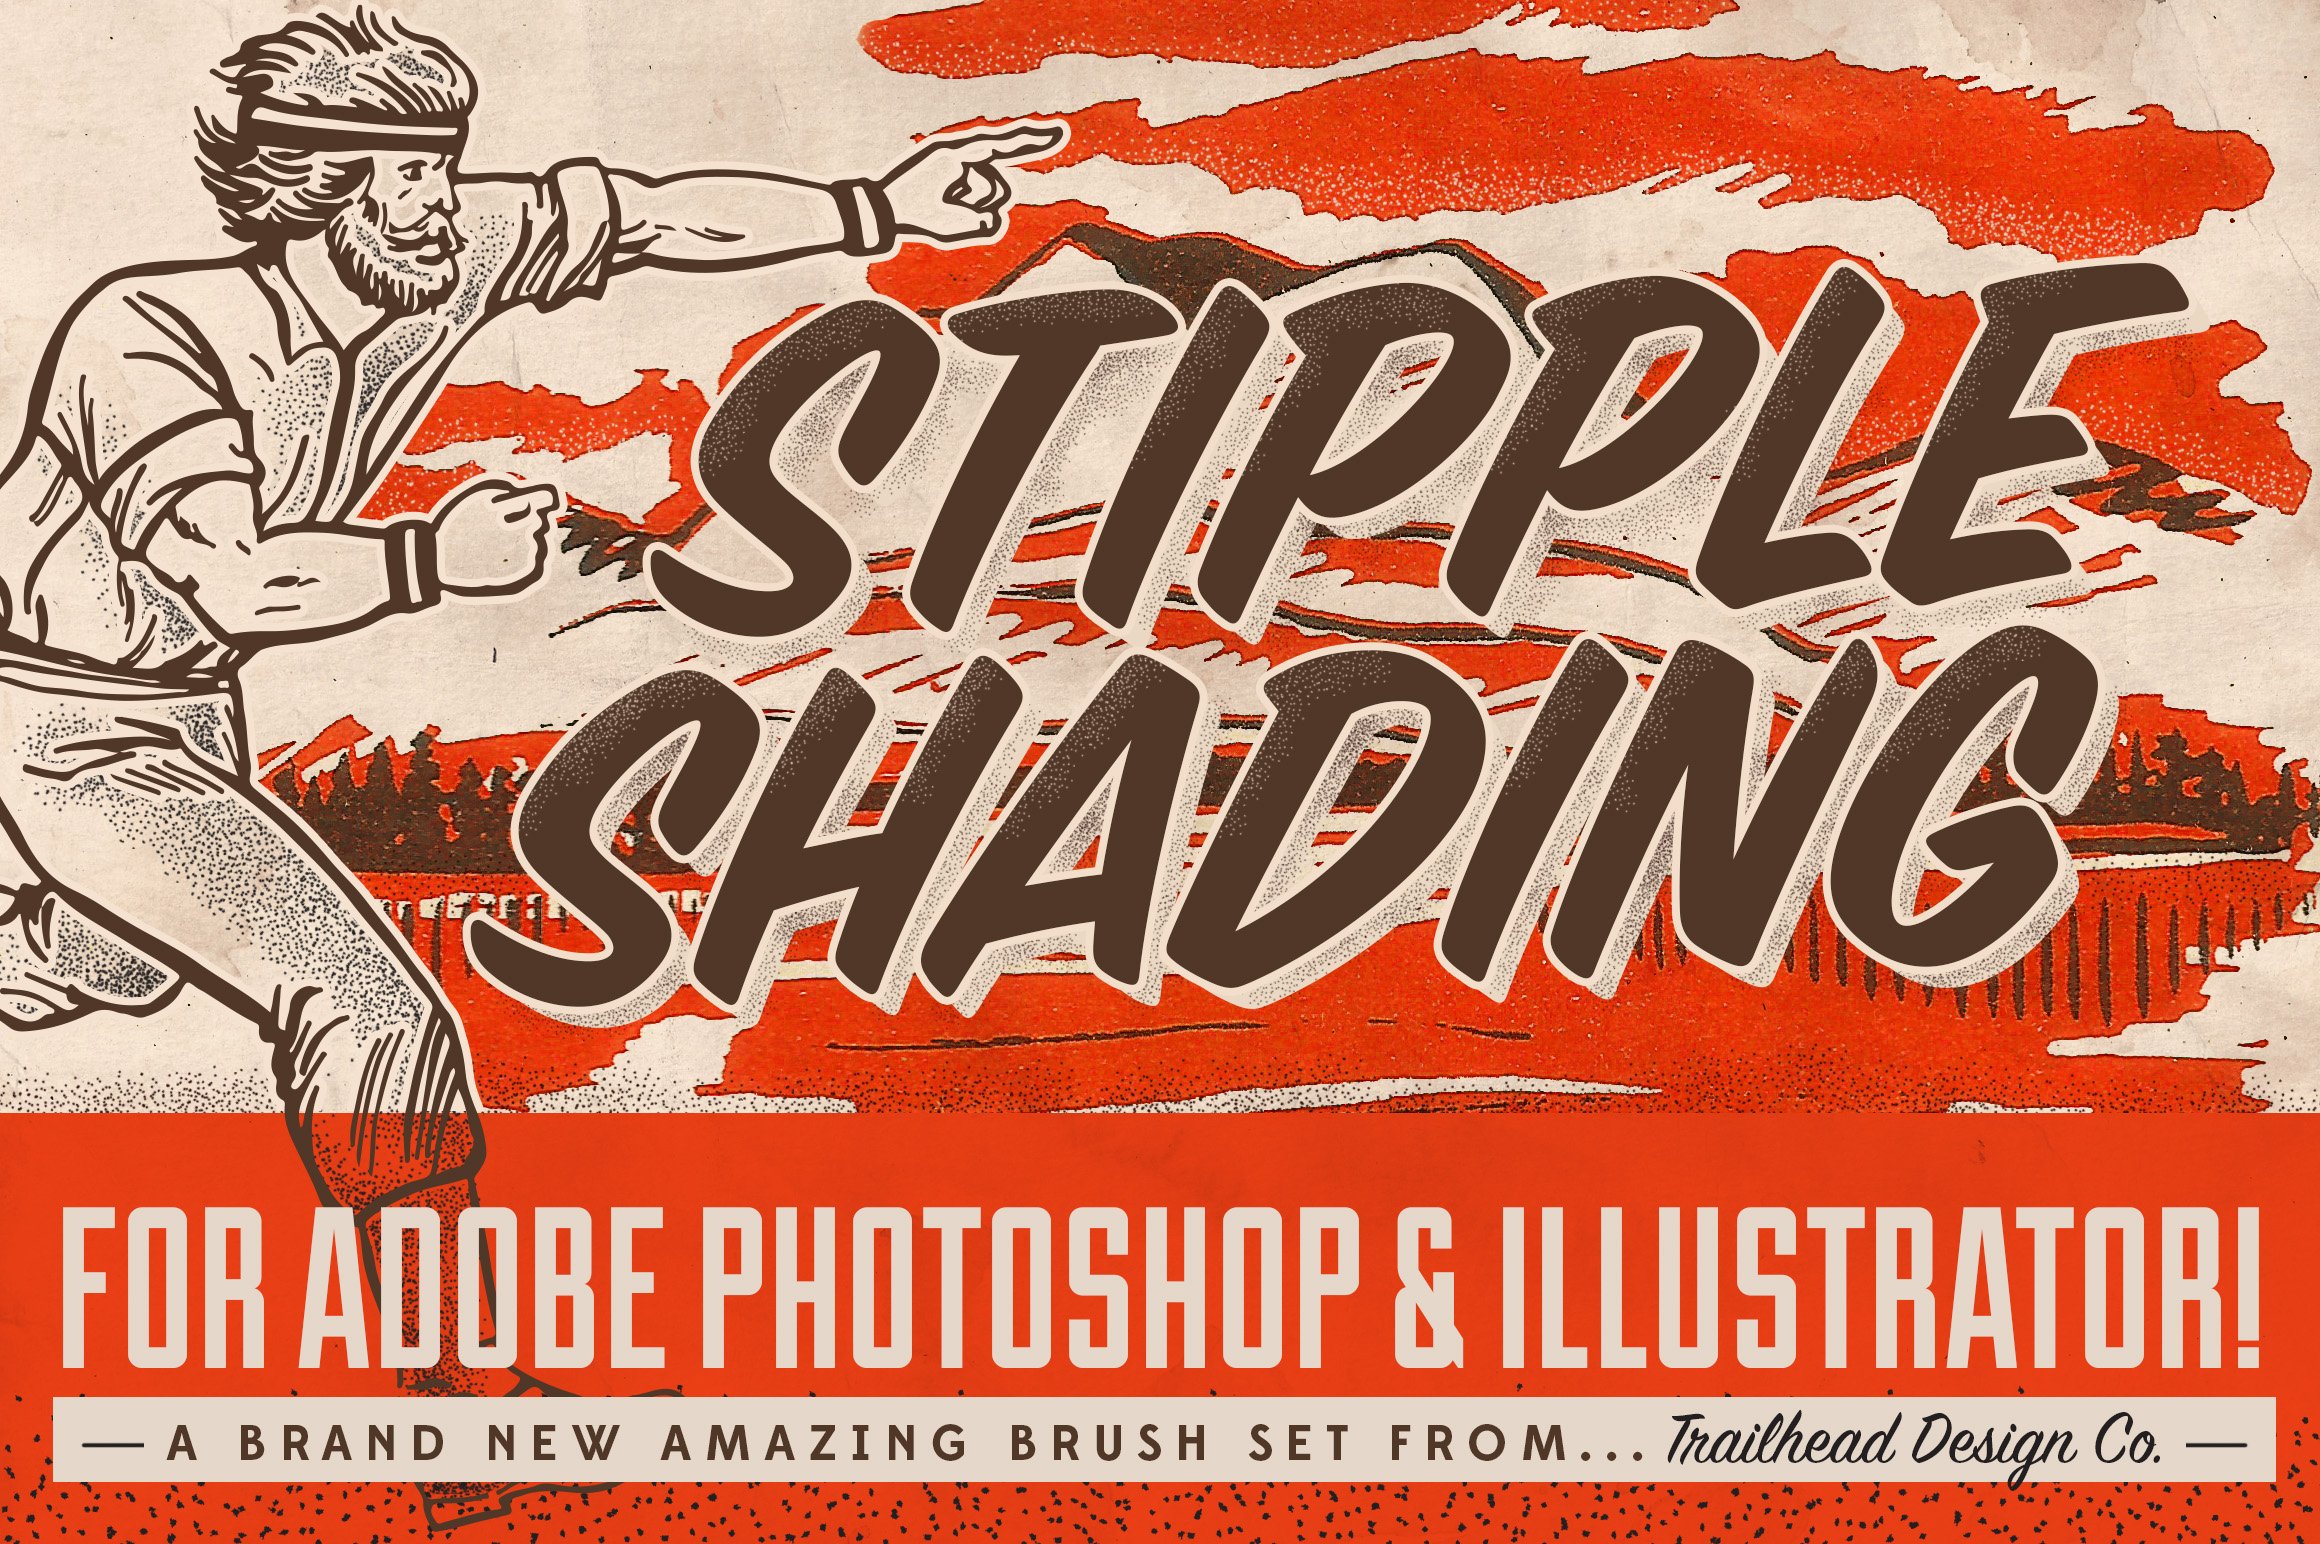 Stipple Shading Brushes for PS & AIcover image.